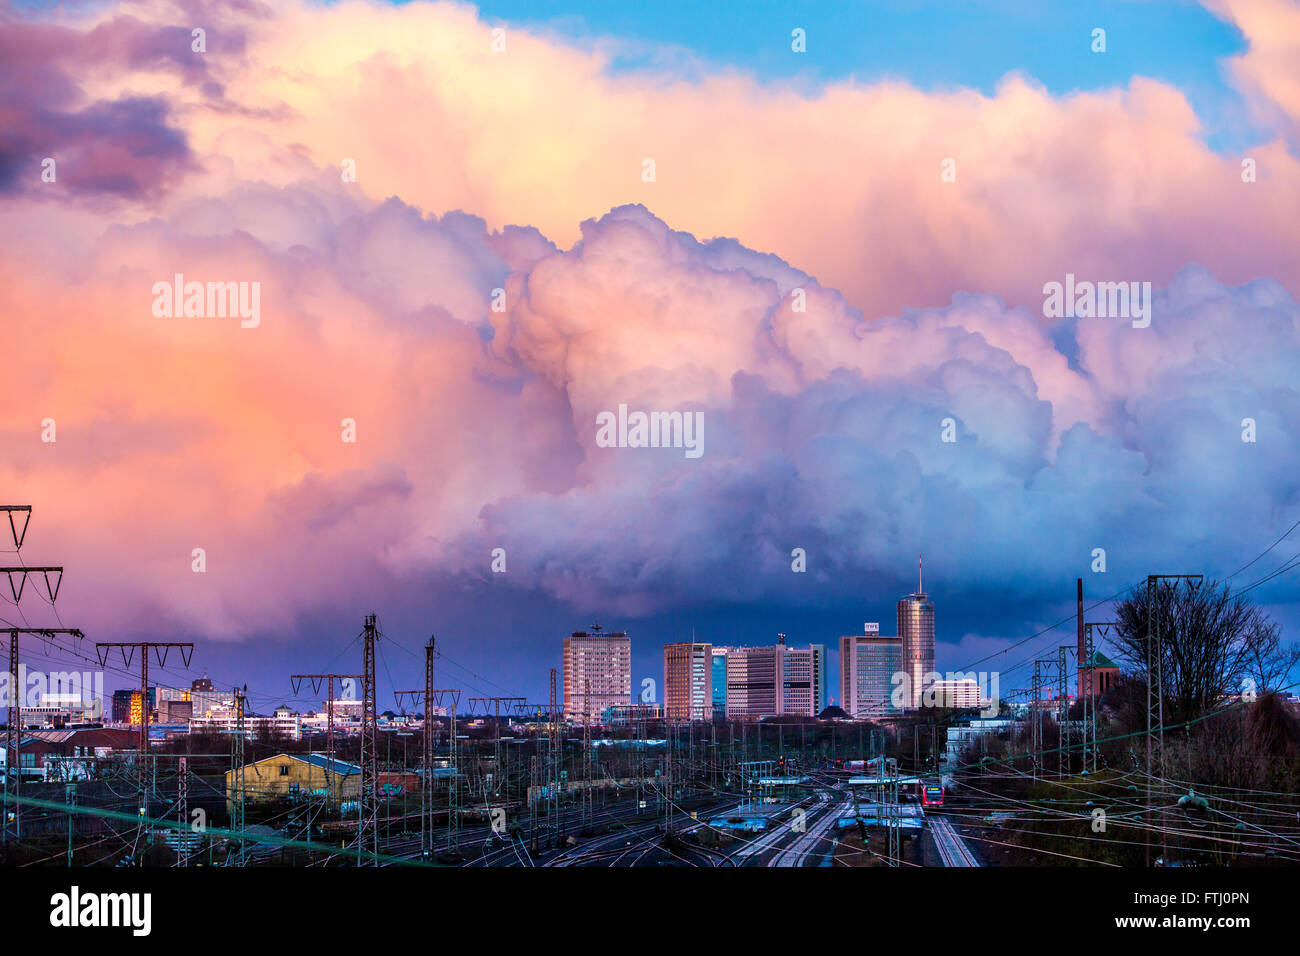 Skyline of the business district of Essen, Germany, railway tracks to the central station, storm clouds, trains, Stock Photo